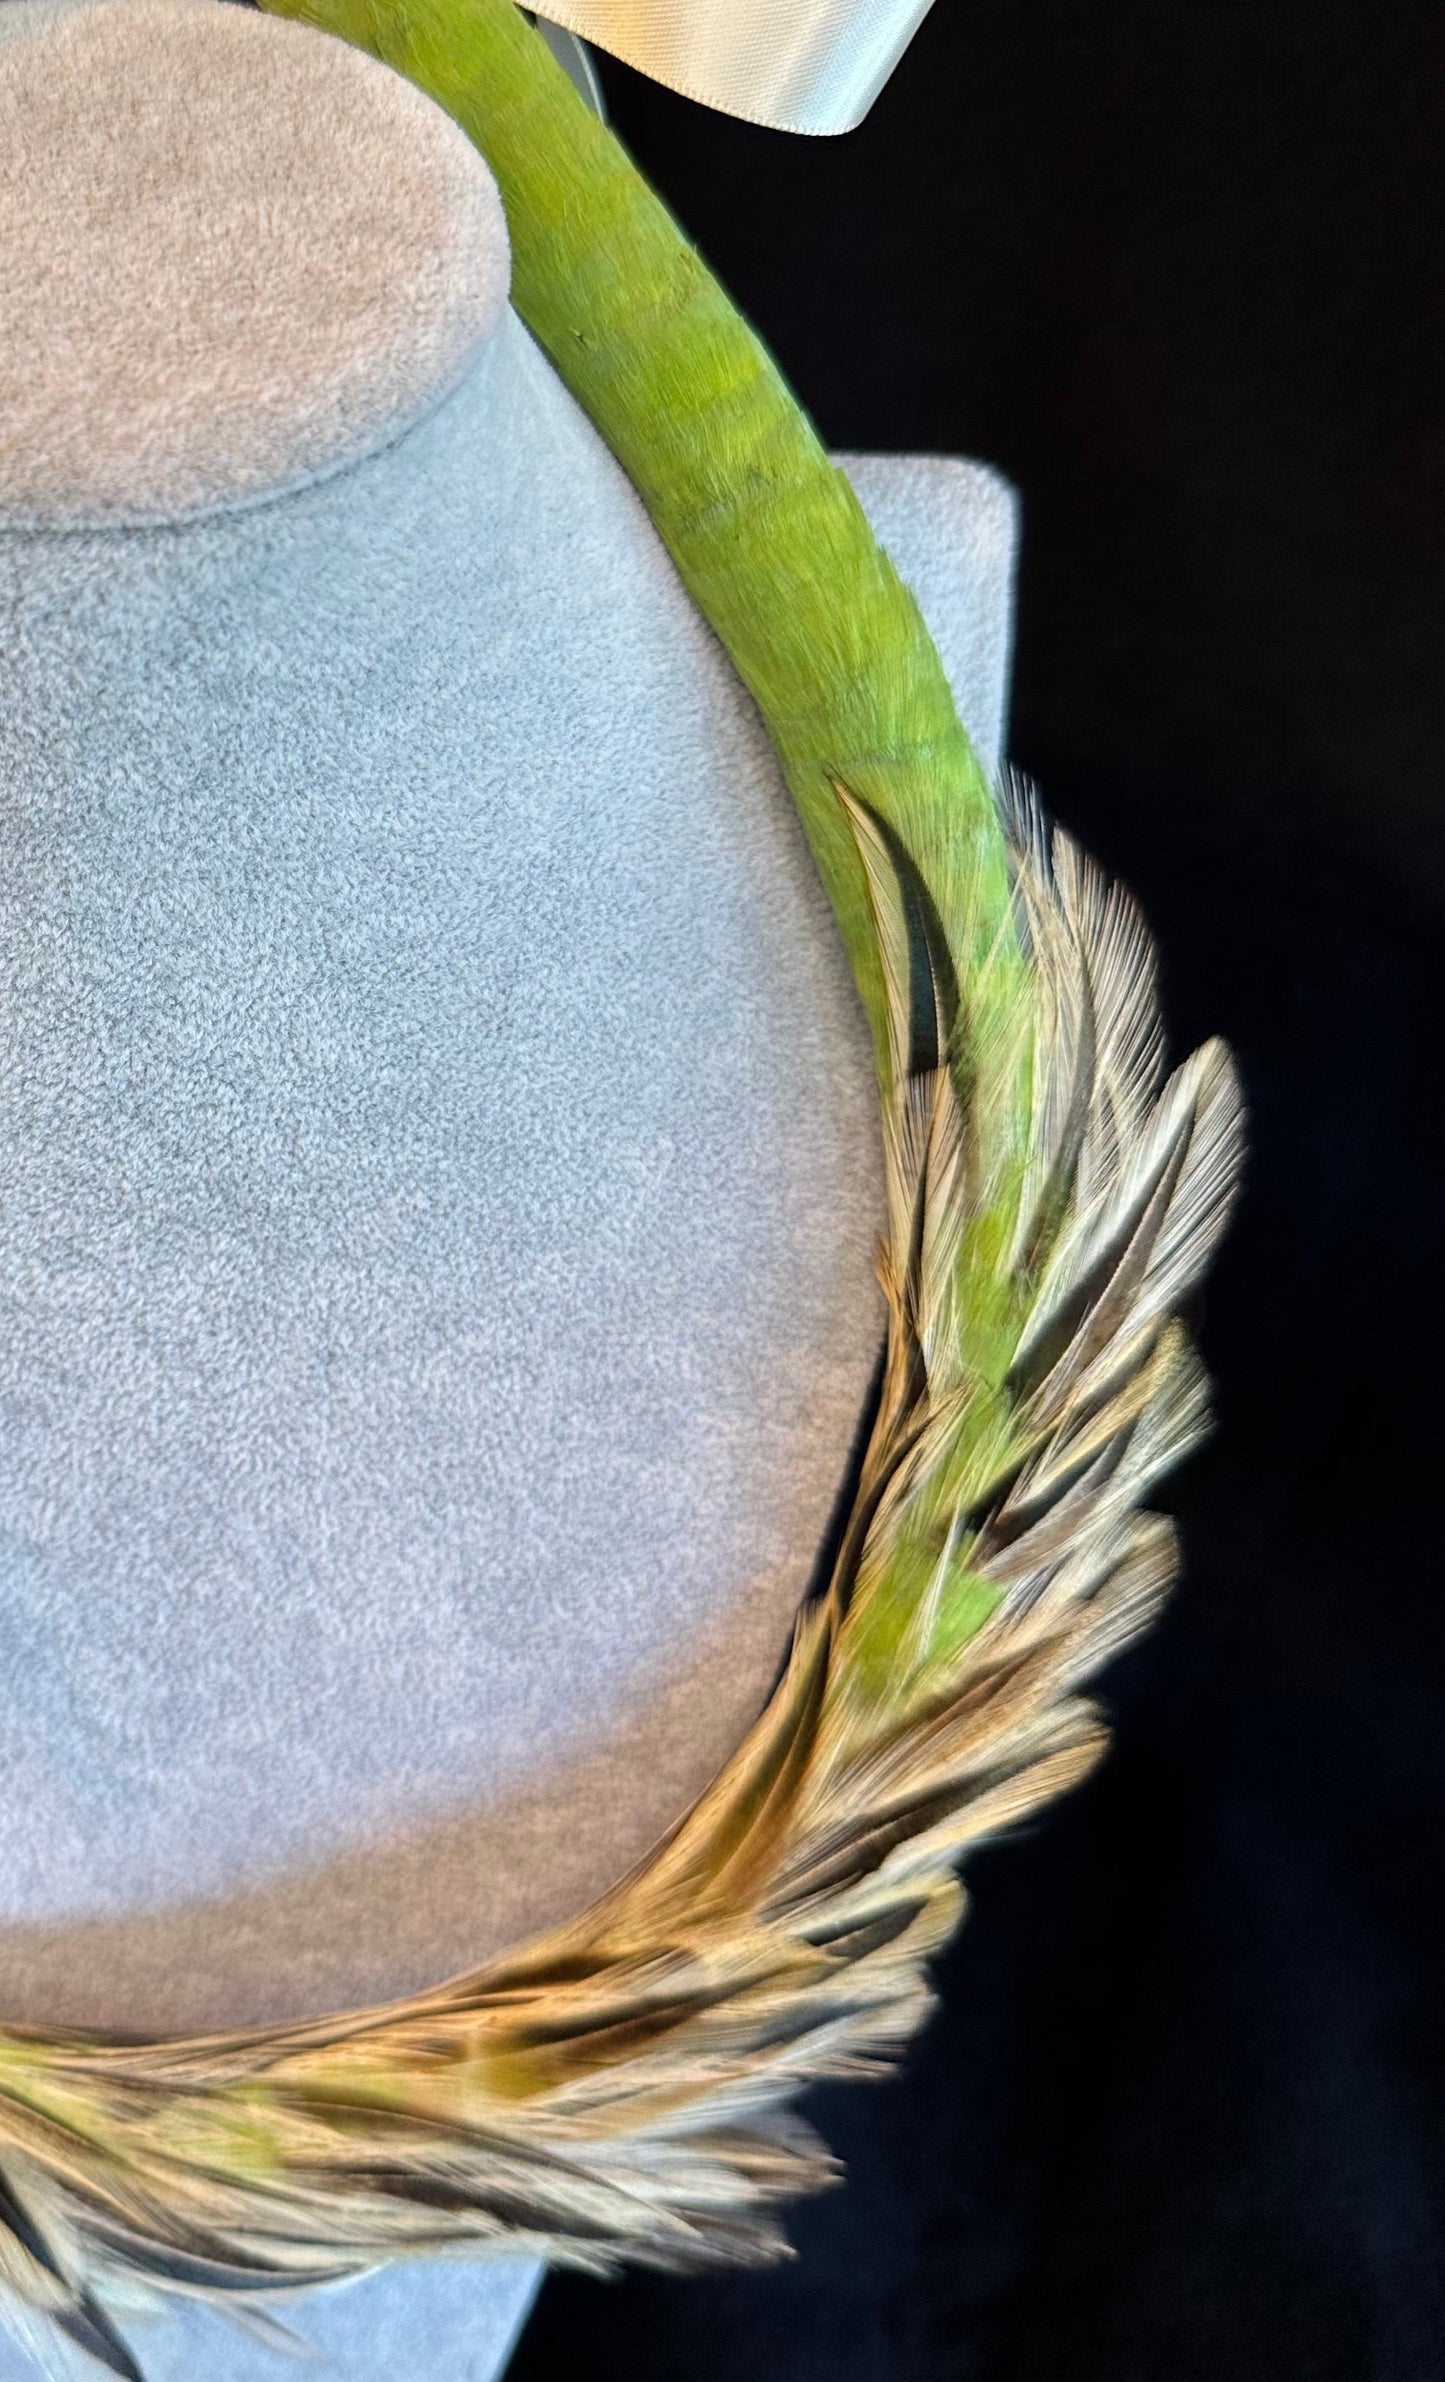 Asymmetric Light Olive Lei Hulu (feather lei) with "badger" rooster accents